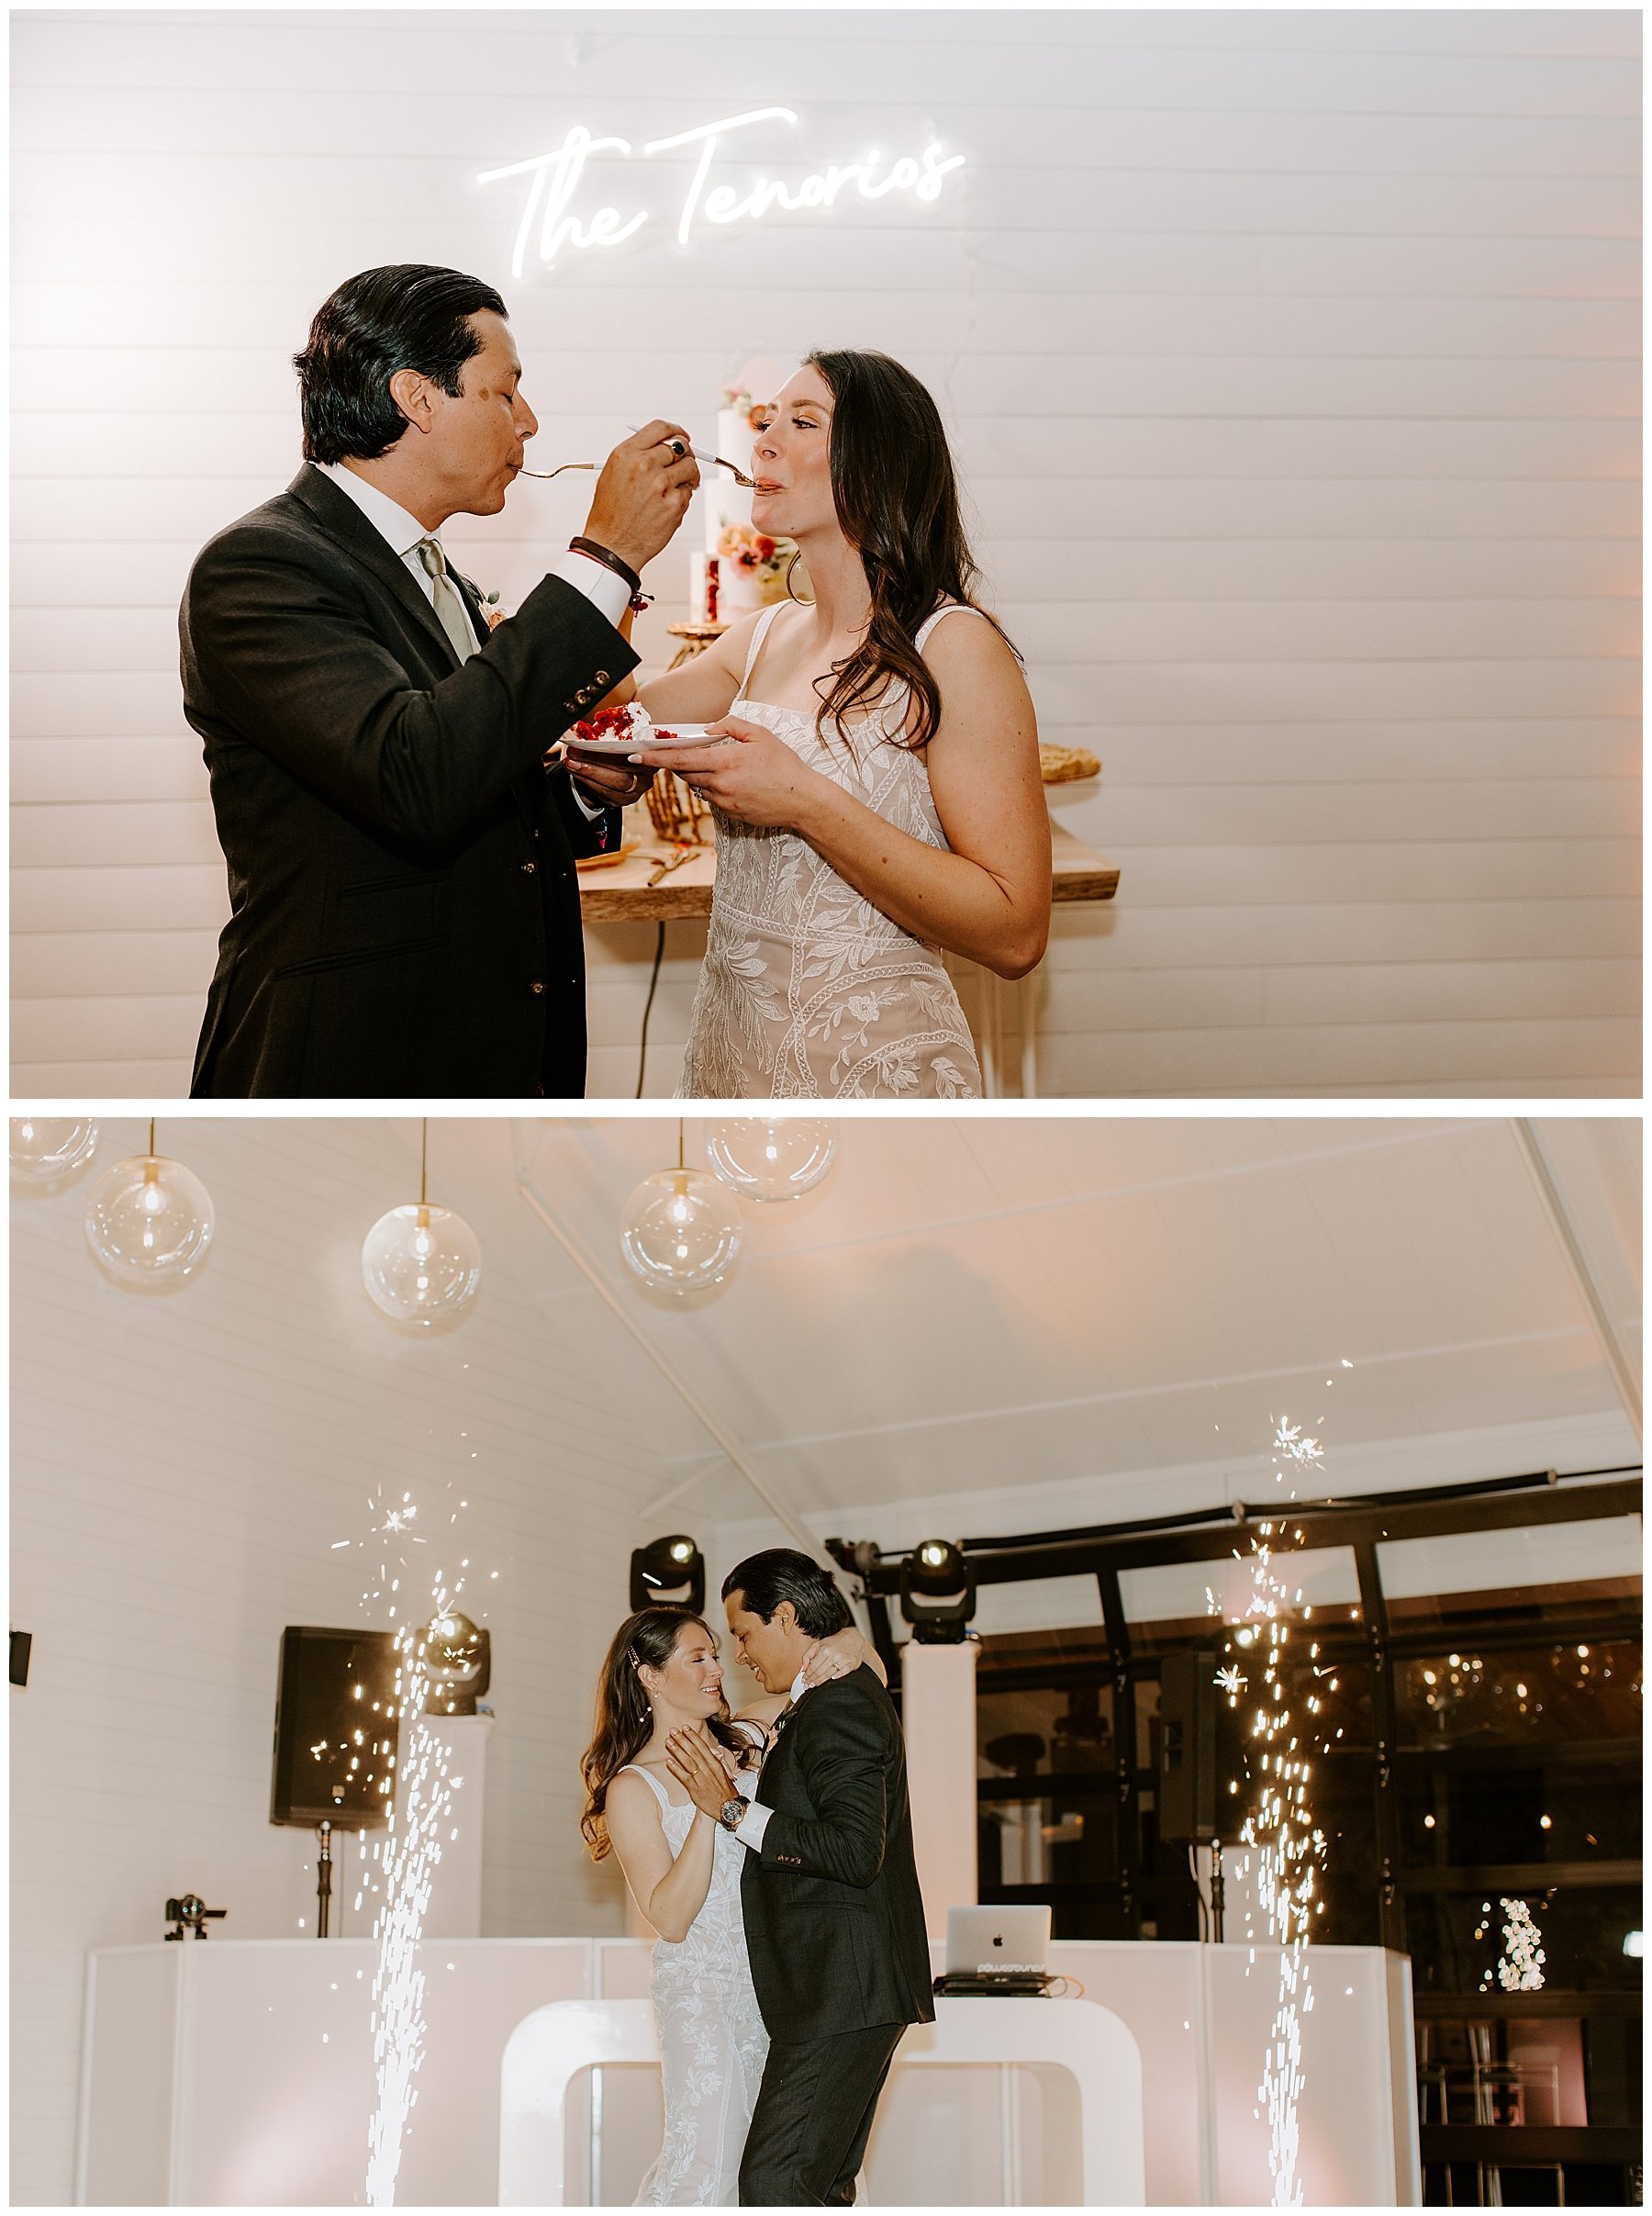 Mae's Ridge Wedding Day with Pastel Color Palette | Ashley Medrano Photography